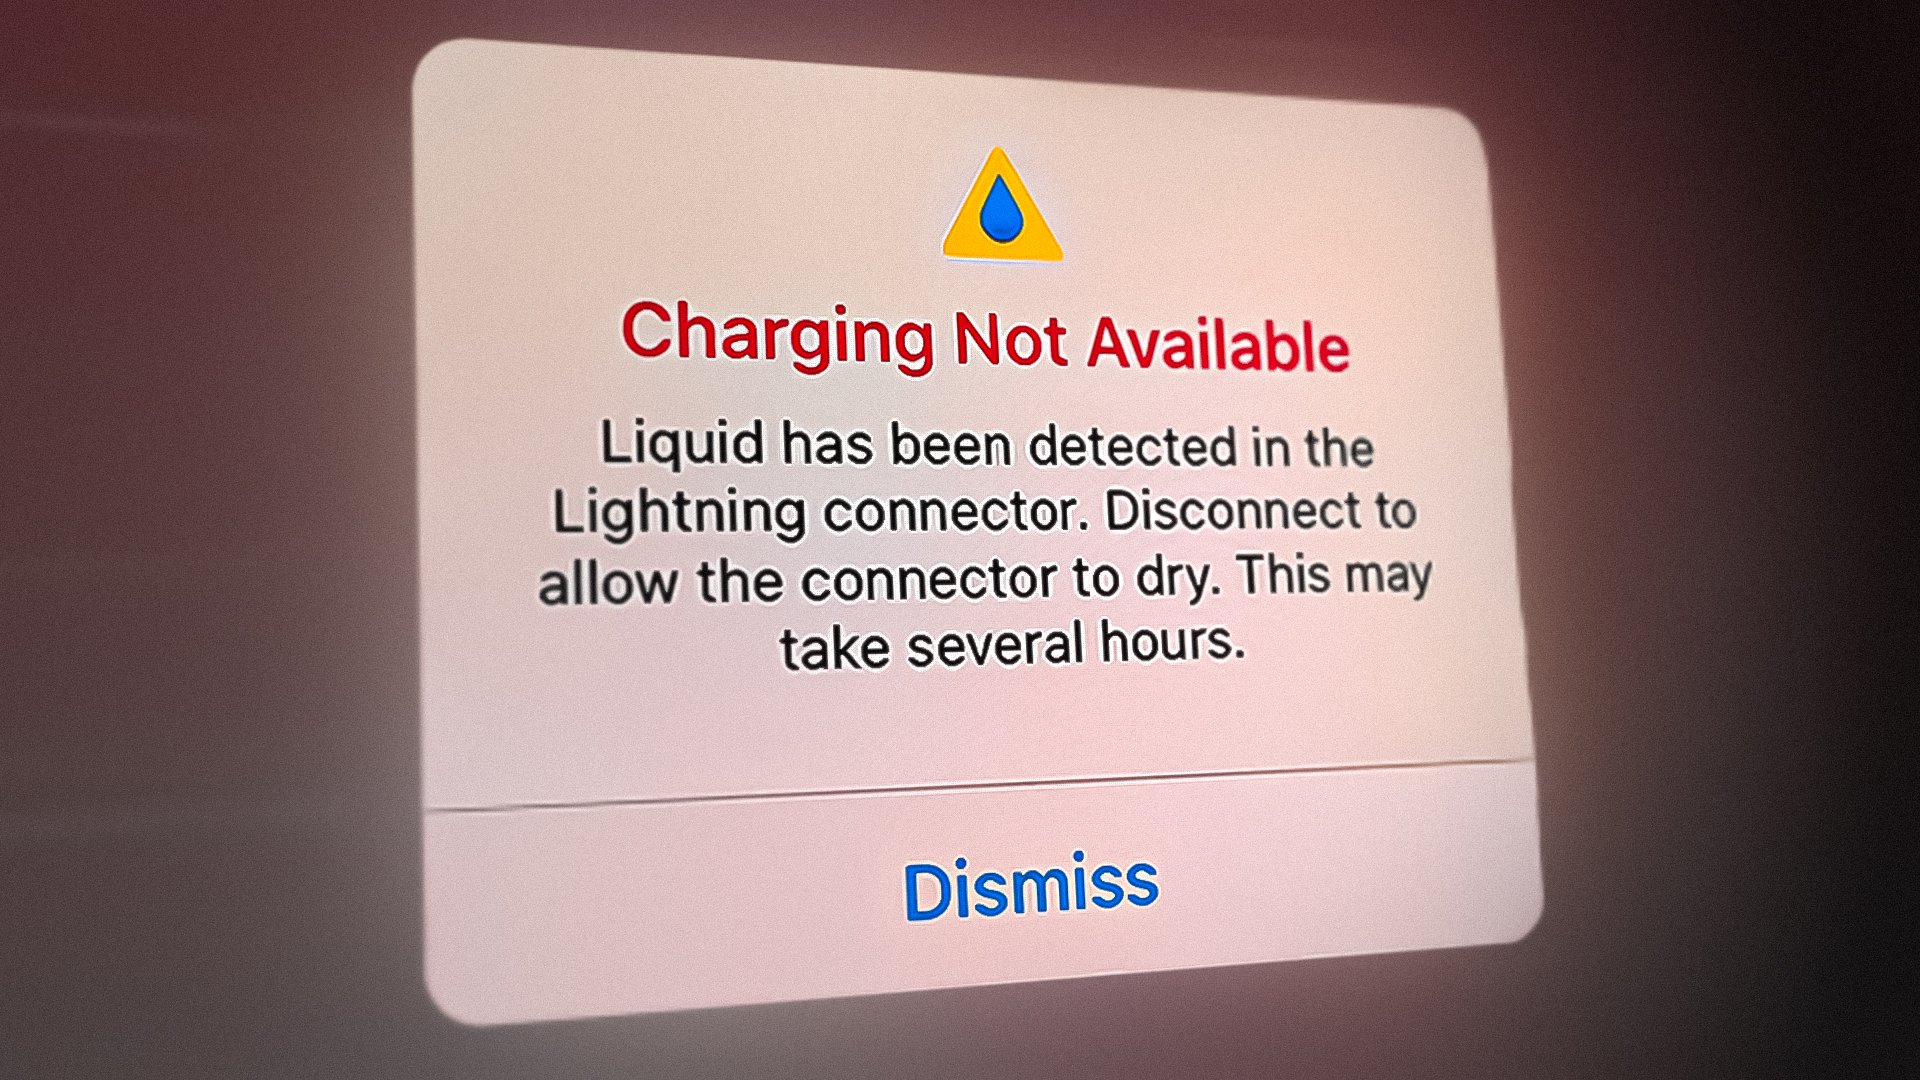 The image displays a warning message about liquid detected in the Lightning connector, preventing the device from charging.